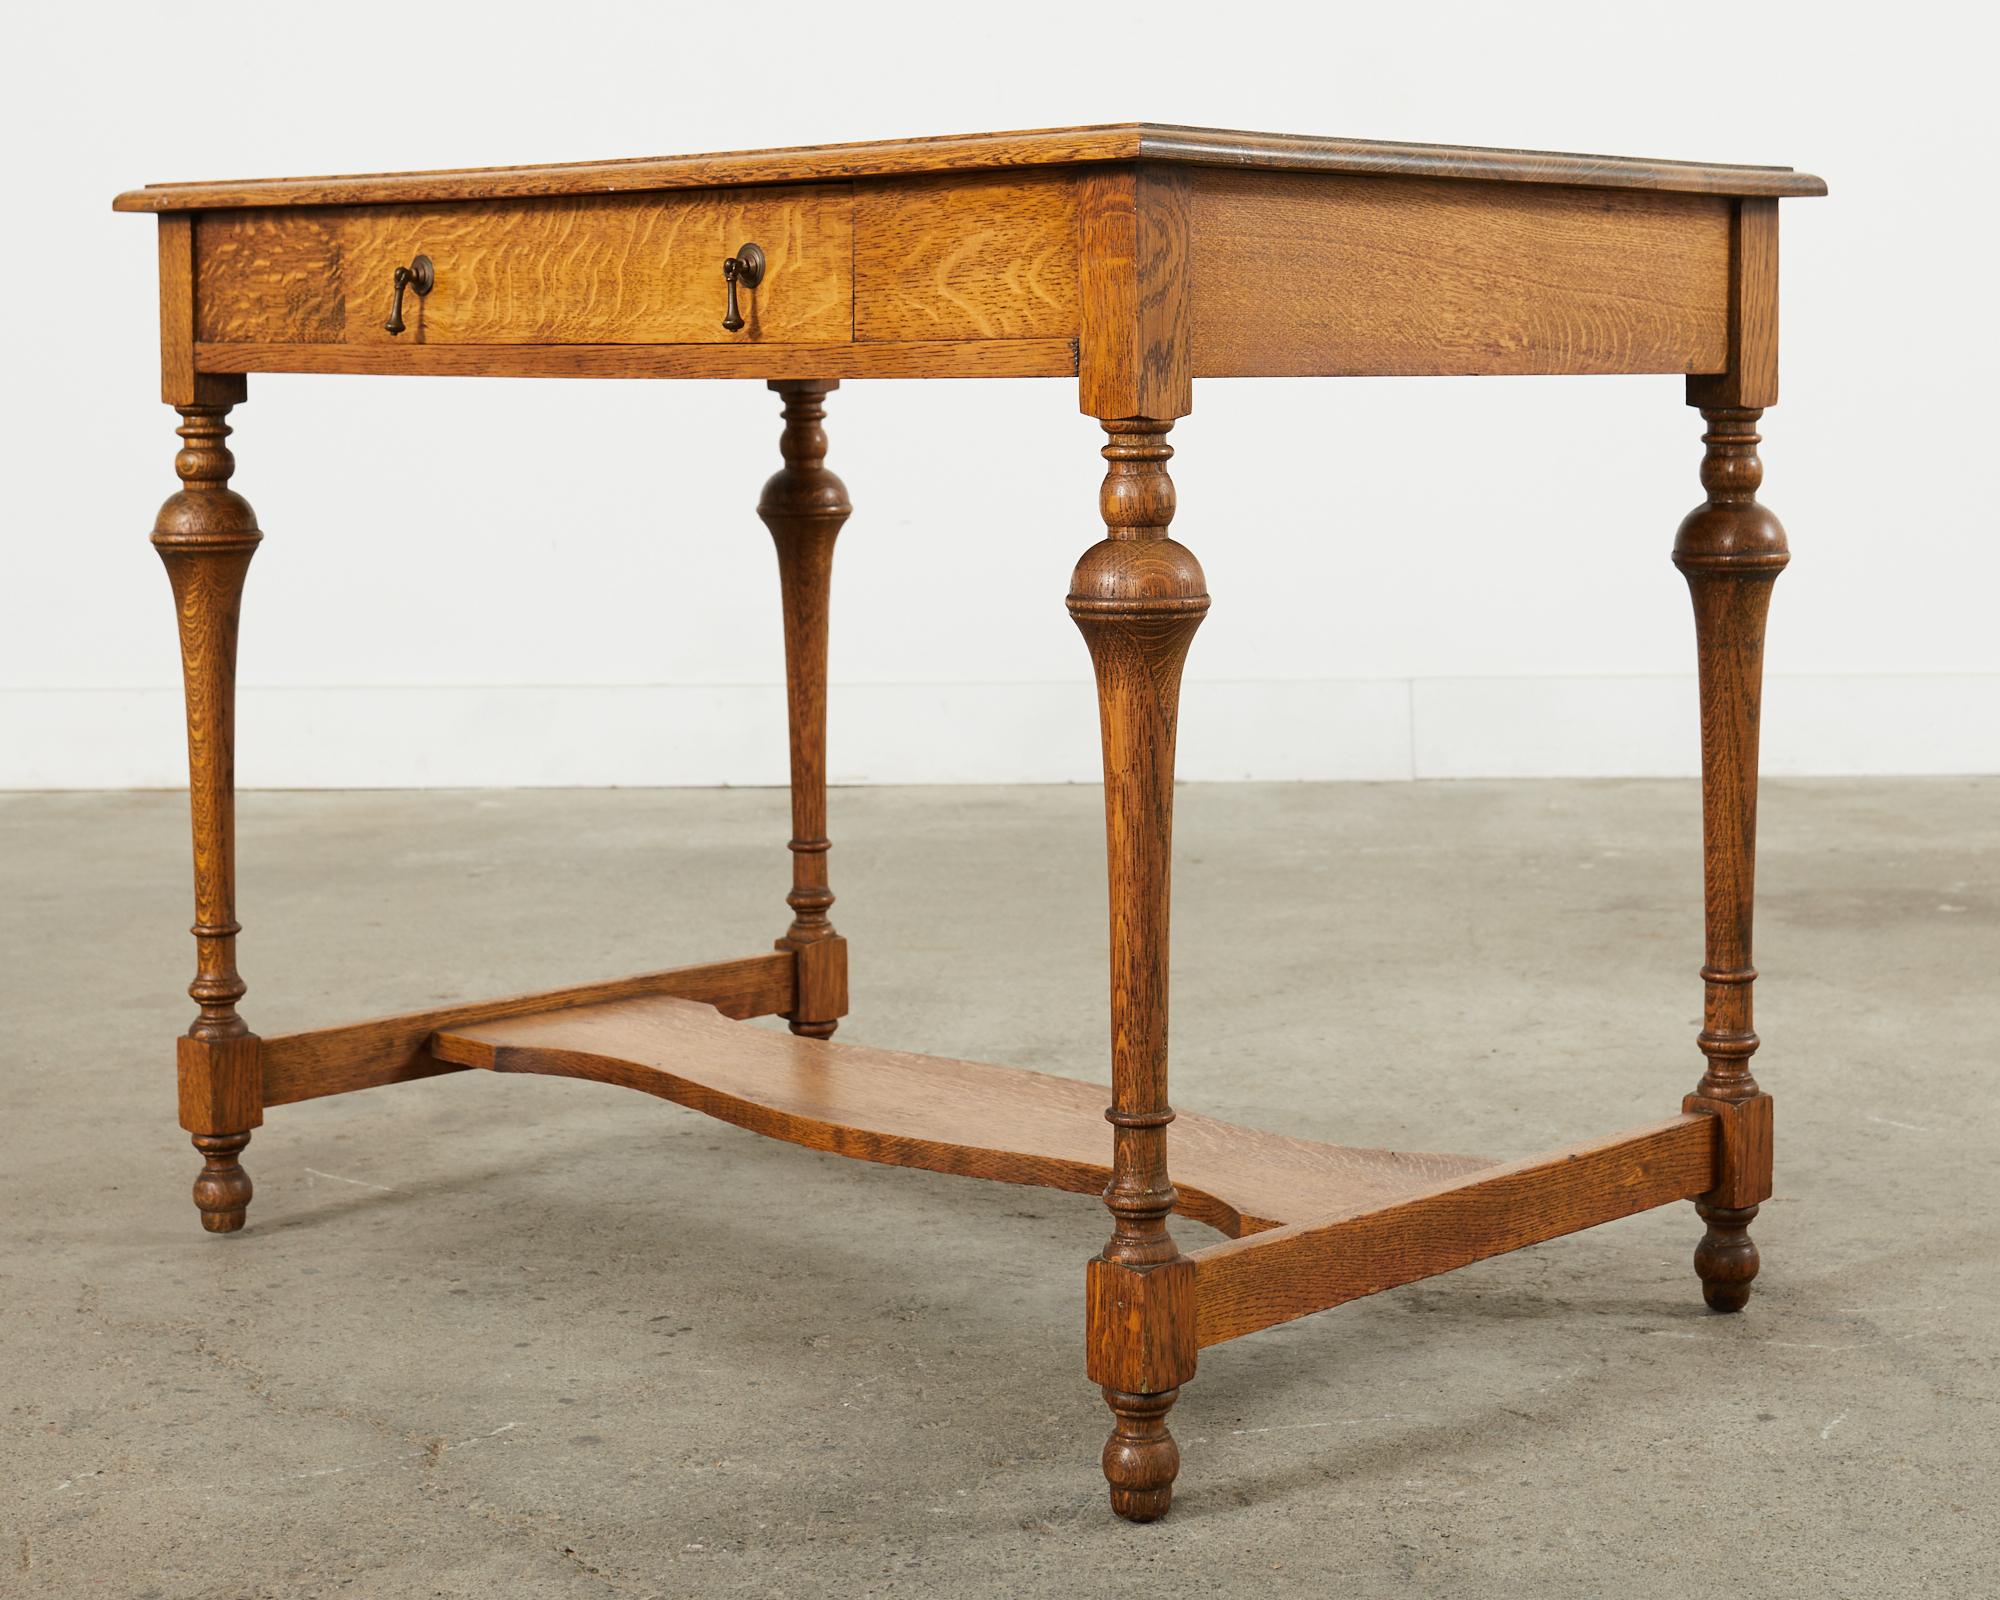 Hand-Crafted English Edwardian Quarter Sawn Oak Library Table Desk For Sale